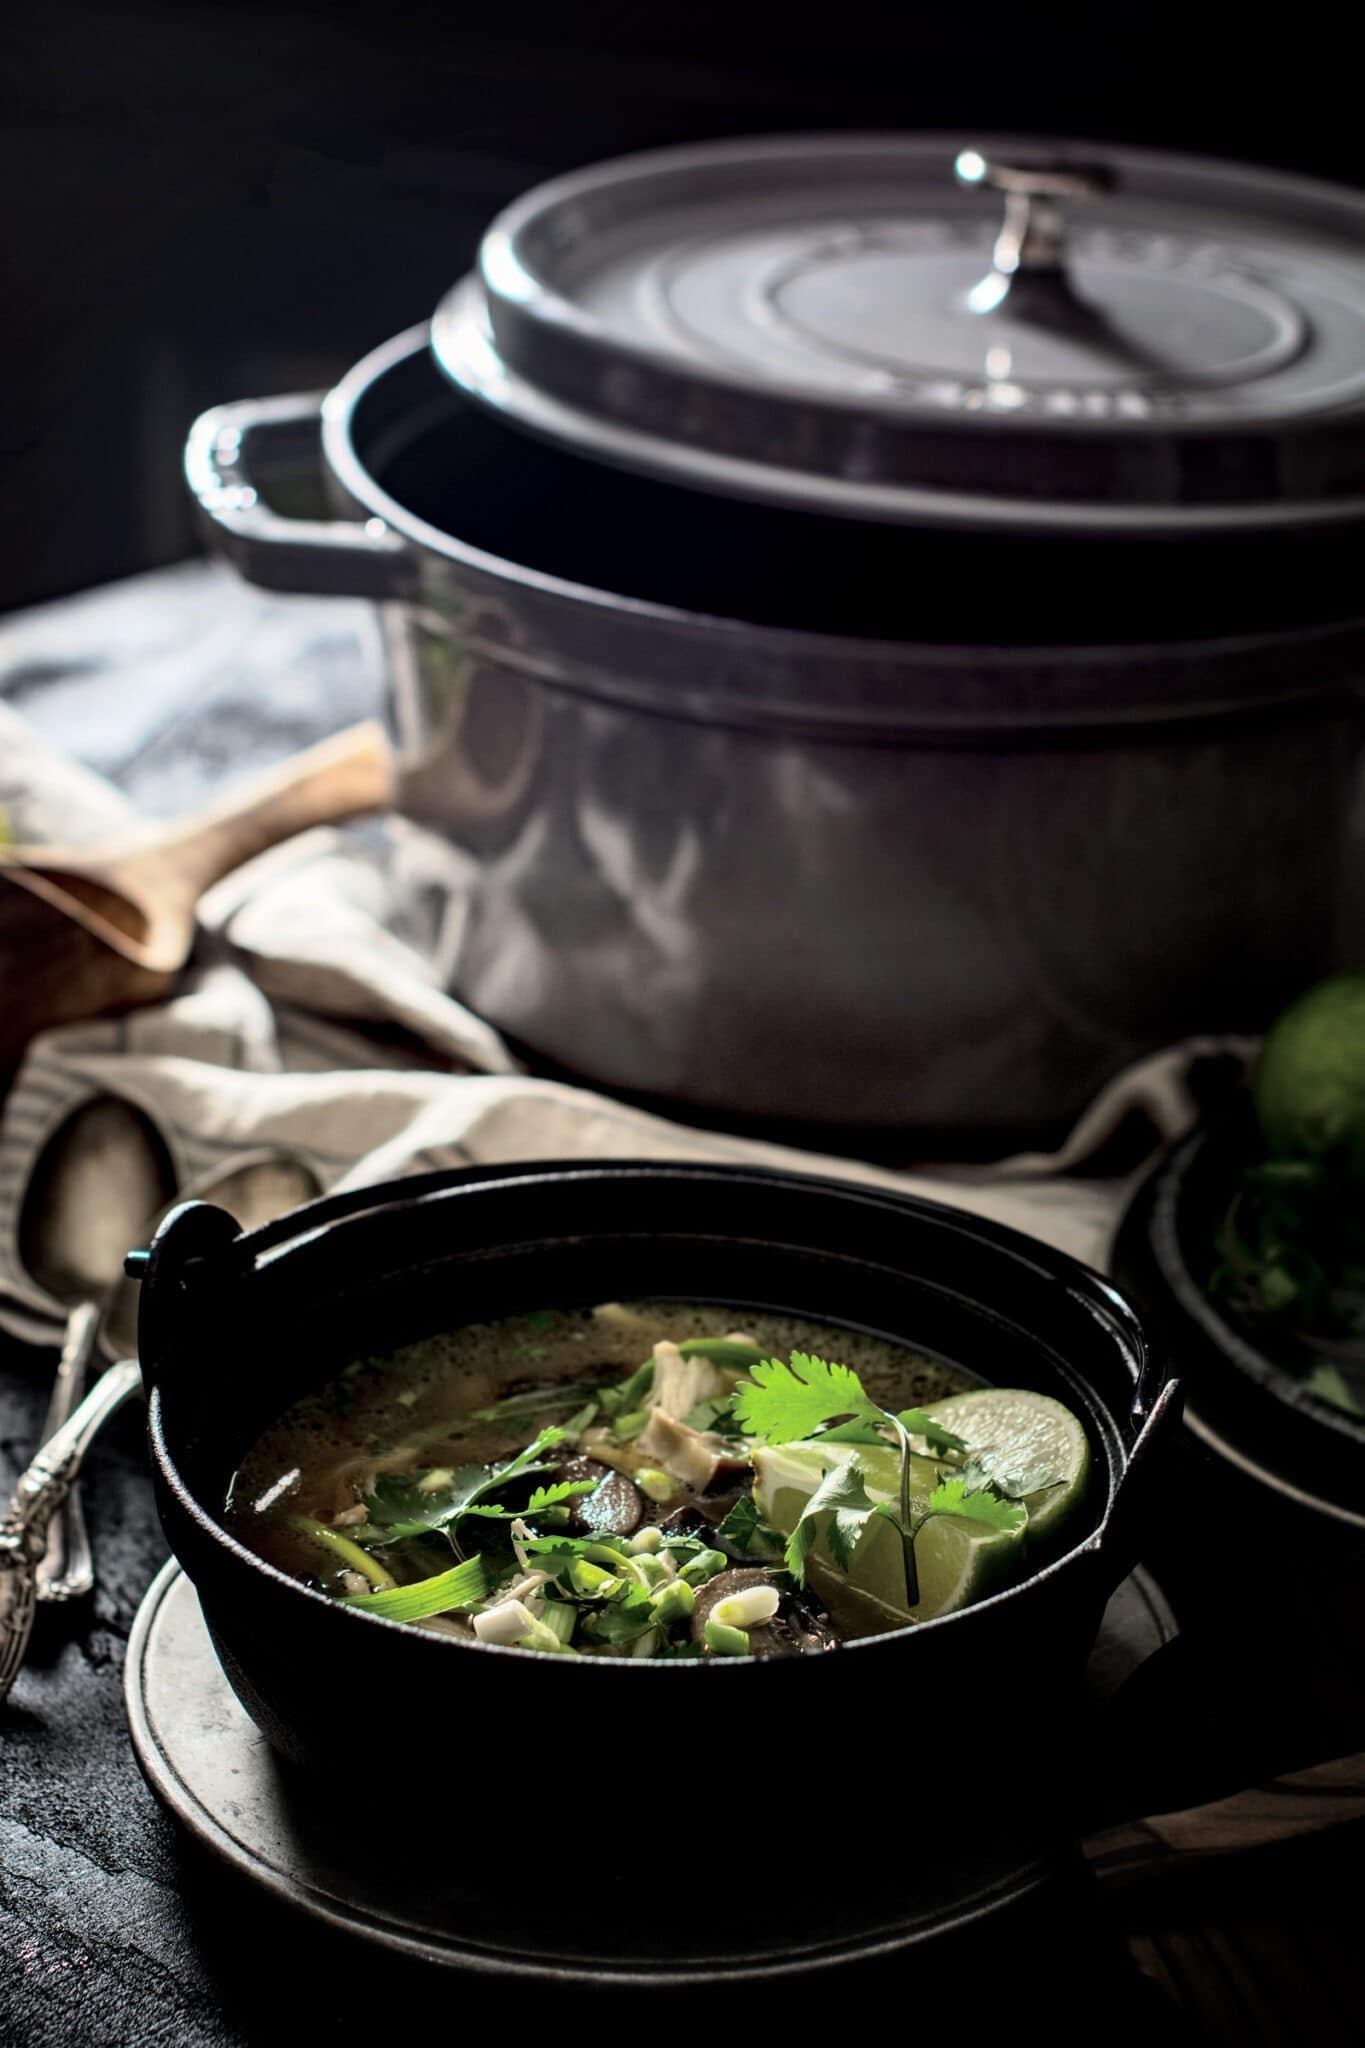 Serve up Tom Kha Gai recipe and cozy up during the chilly nights.